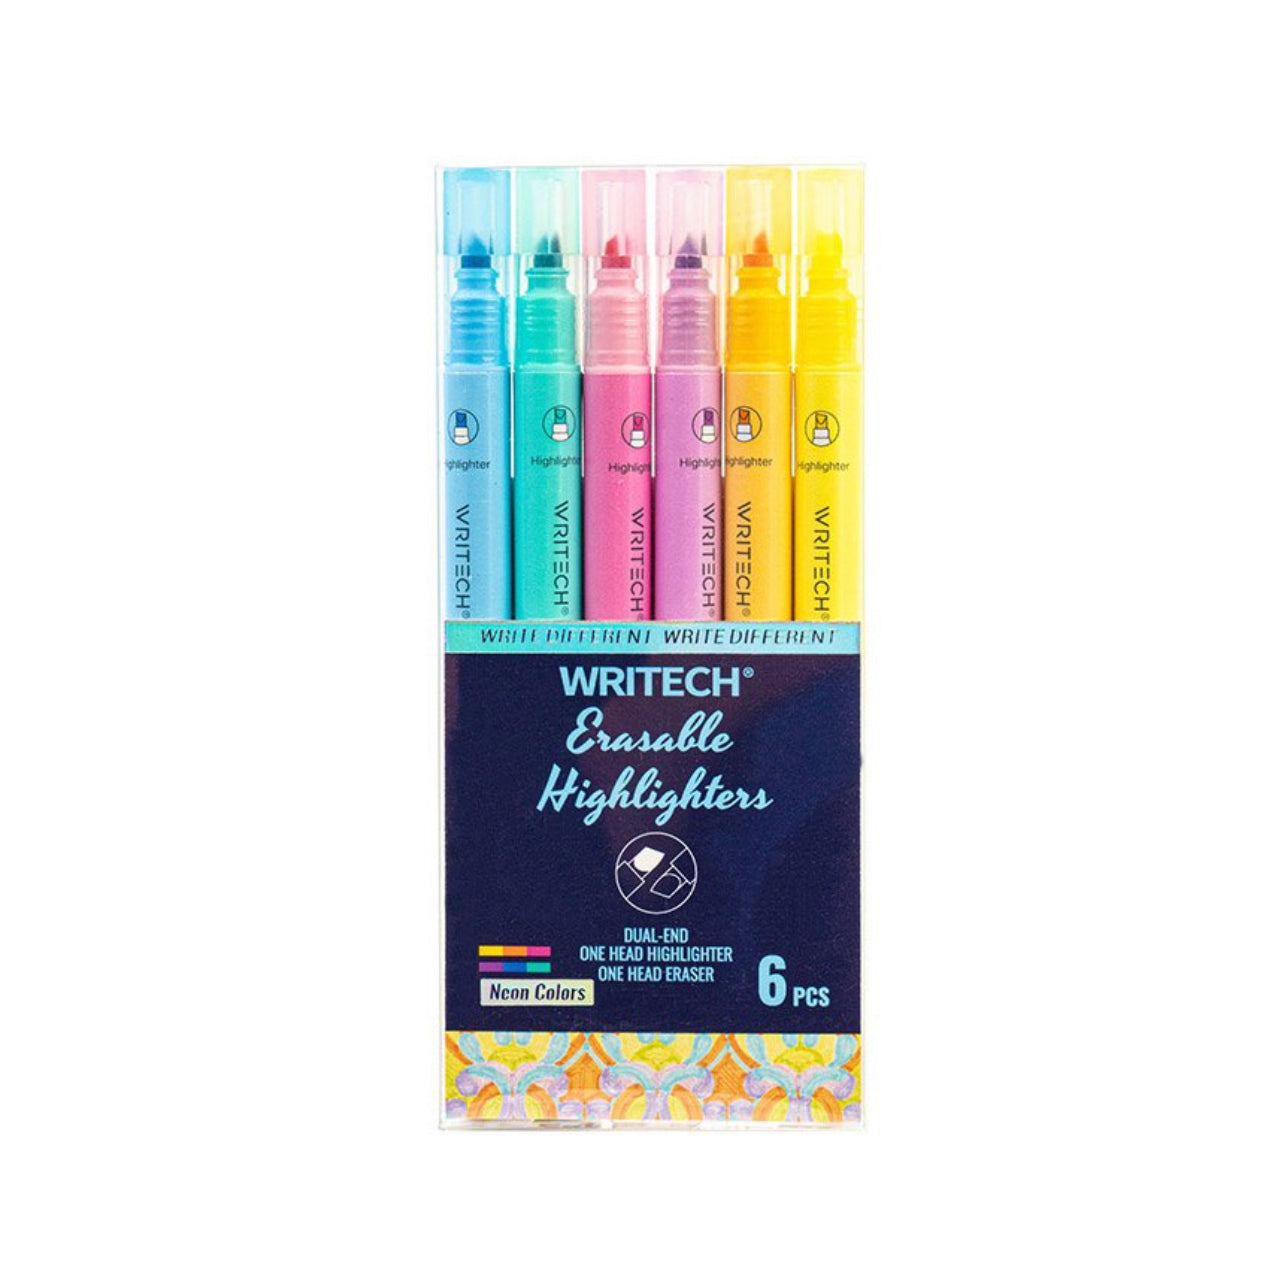 Writech Erasable Highlighters 6 Neon Colors || اقلام فسفوري ٦ لون نيون رايتيك